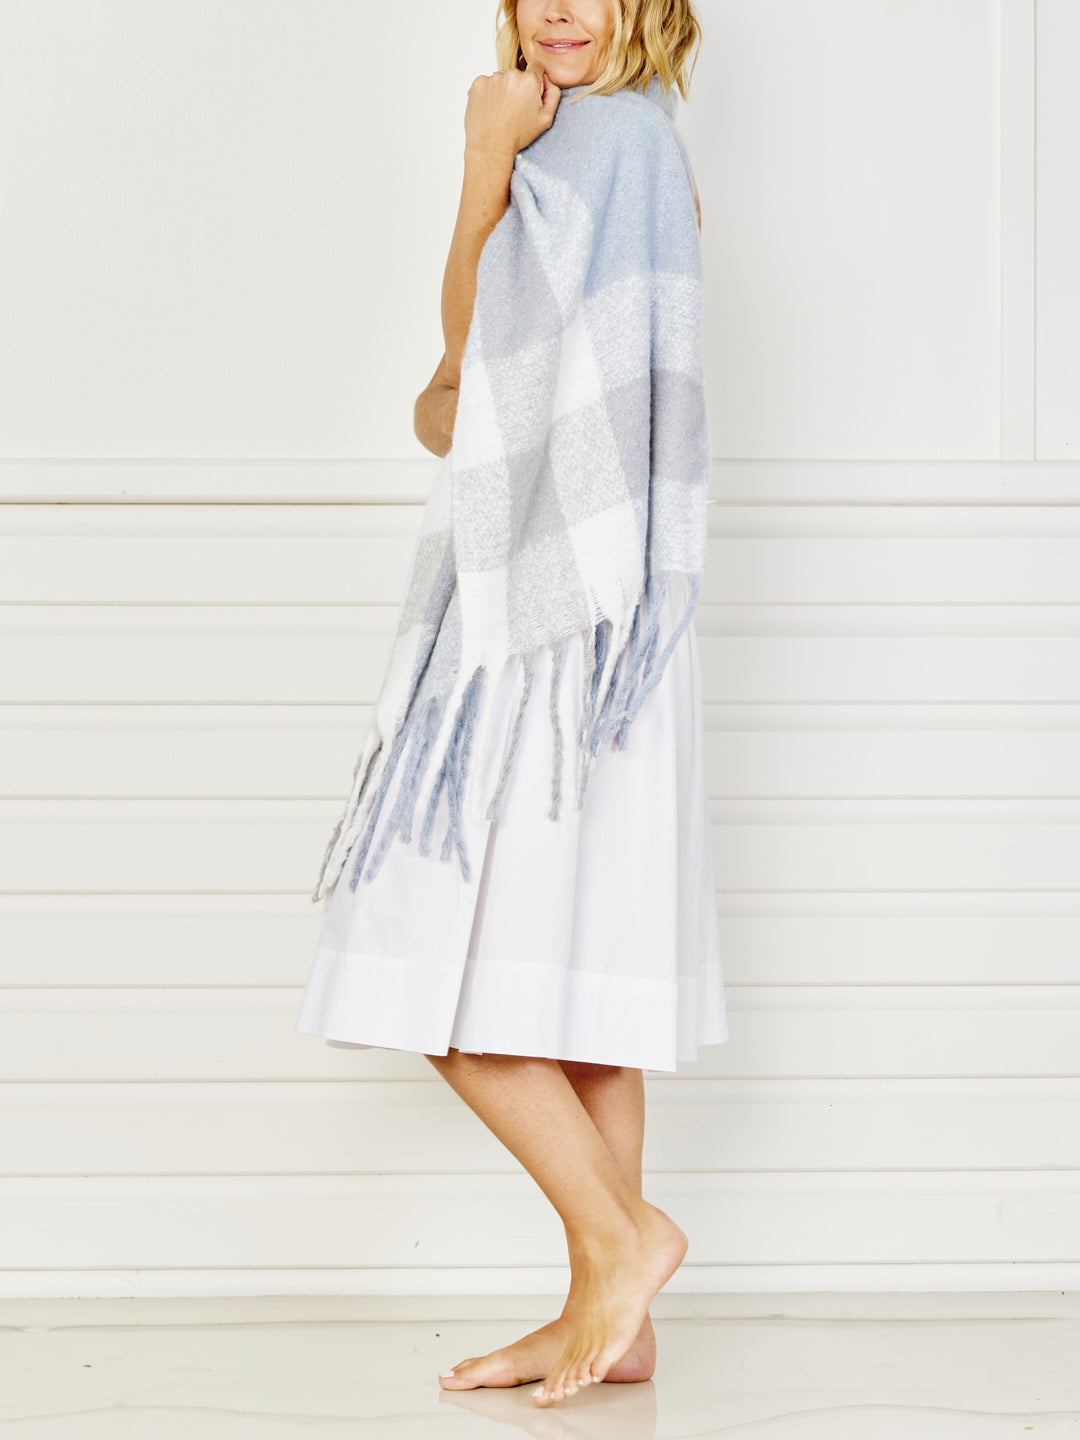 Blanket Check Scarf - Boucle Blue